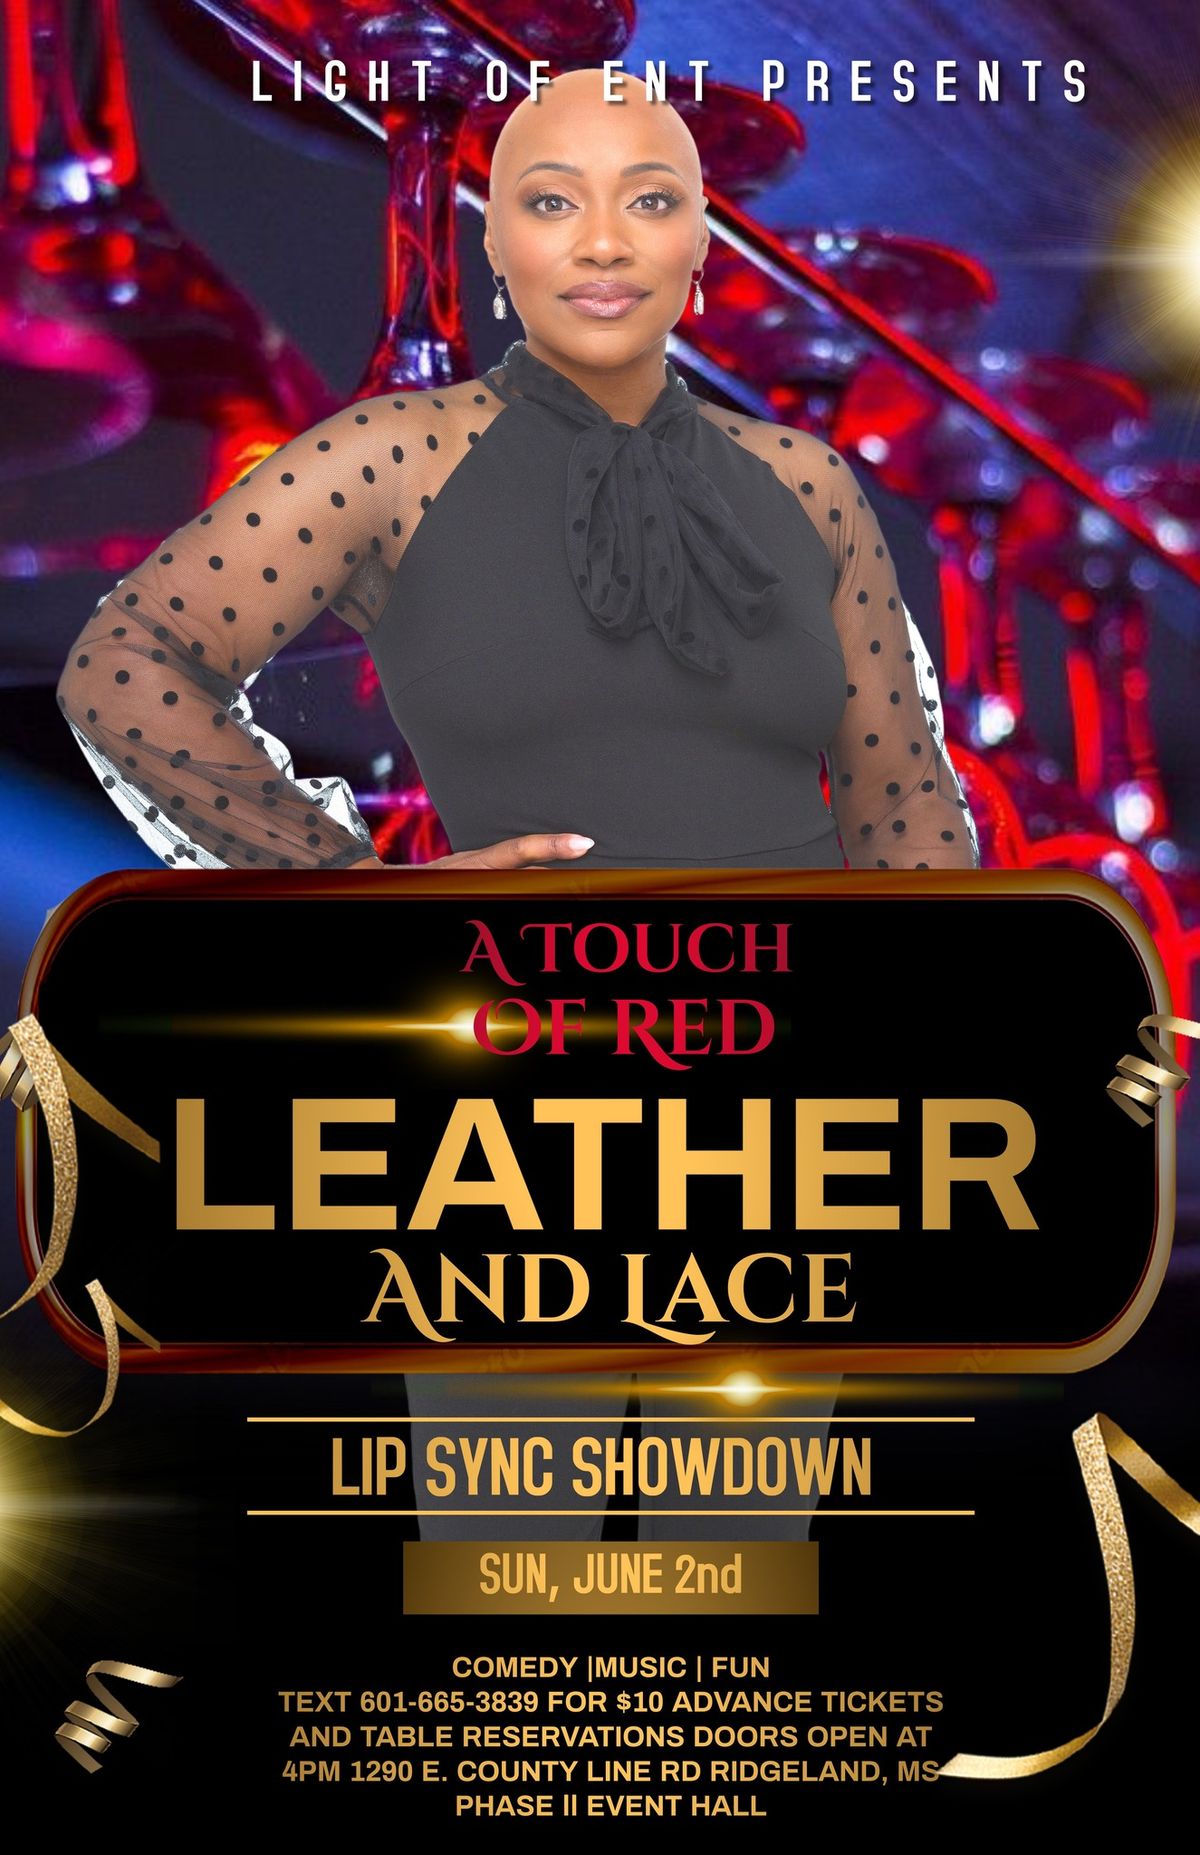 LEATHER & LACE w\/ a touch of RED COMEDY LIP SYNC SHOWCASE